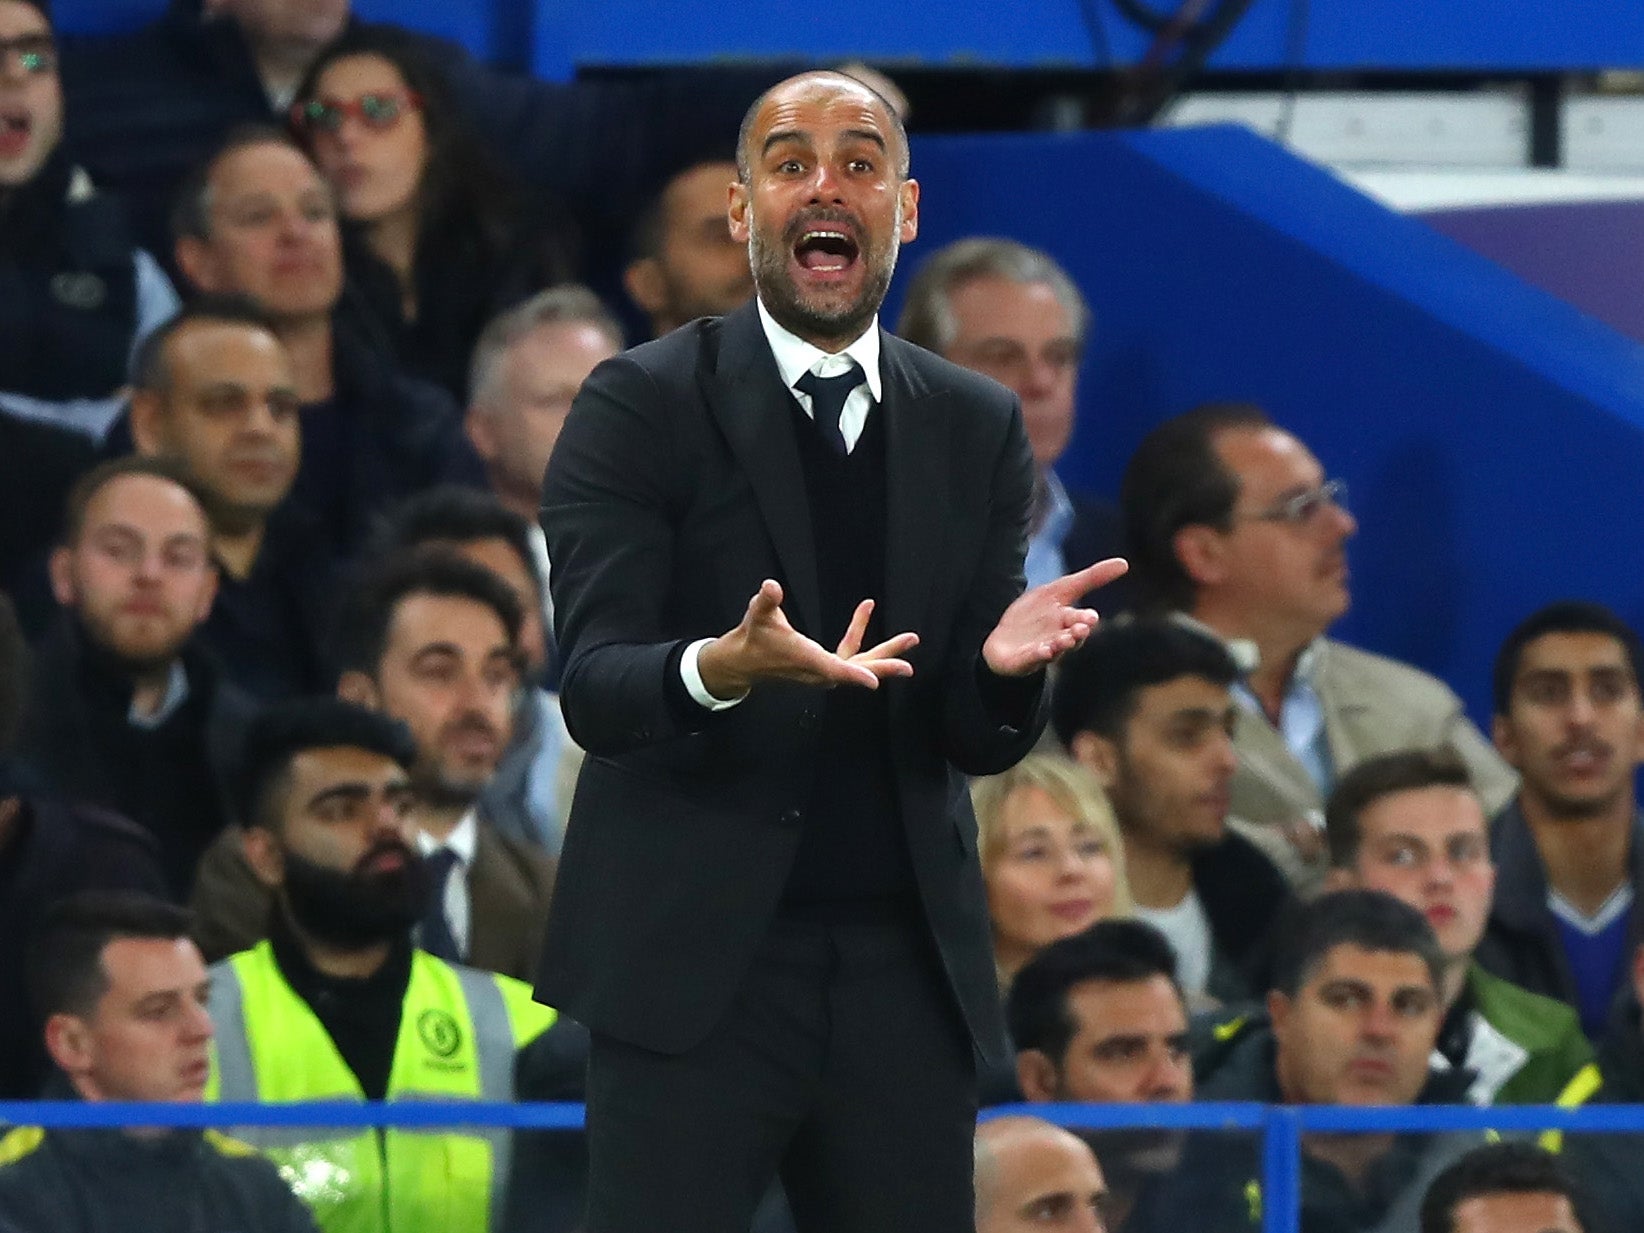 Guardiola said this season has been a 'lesson' for him